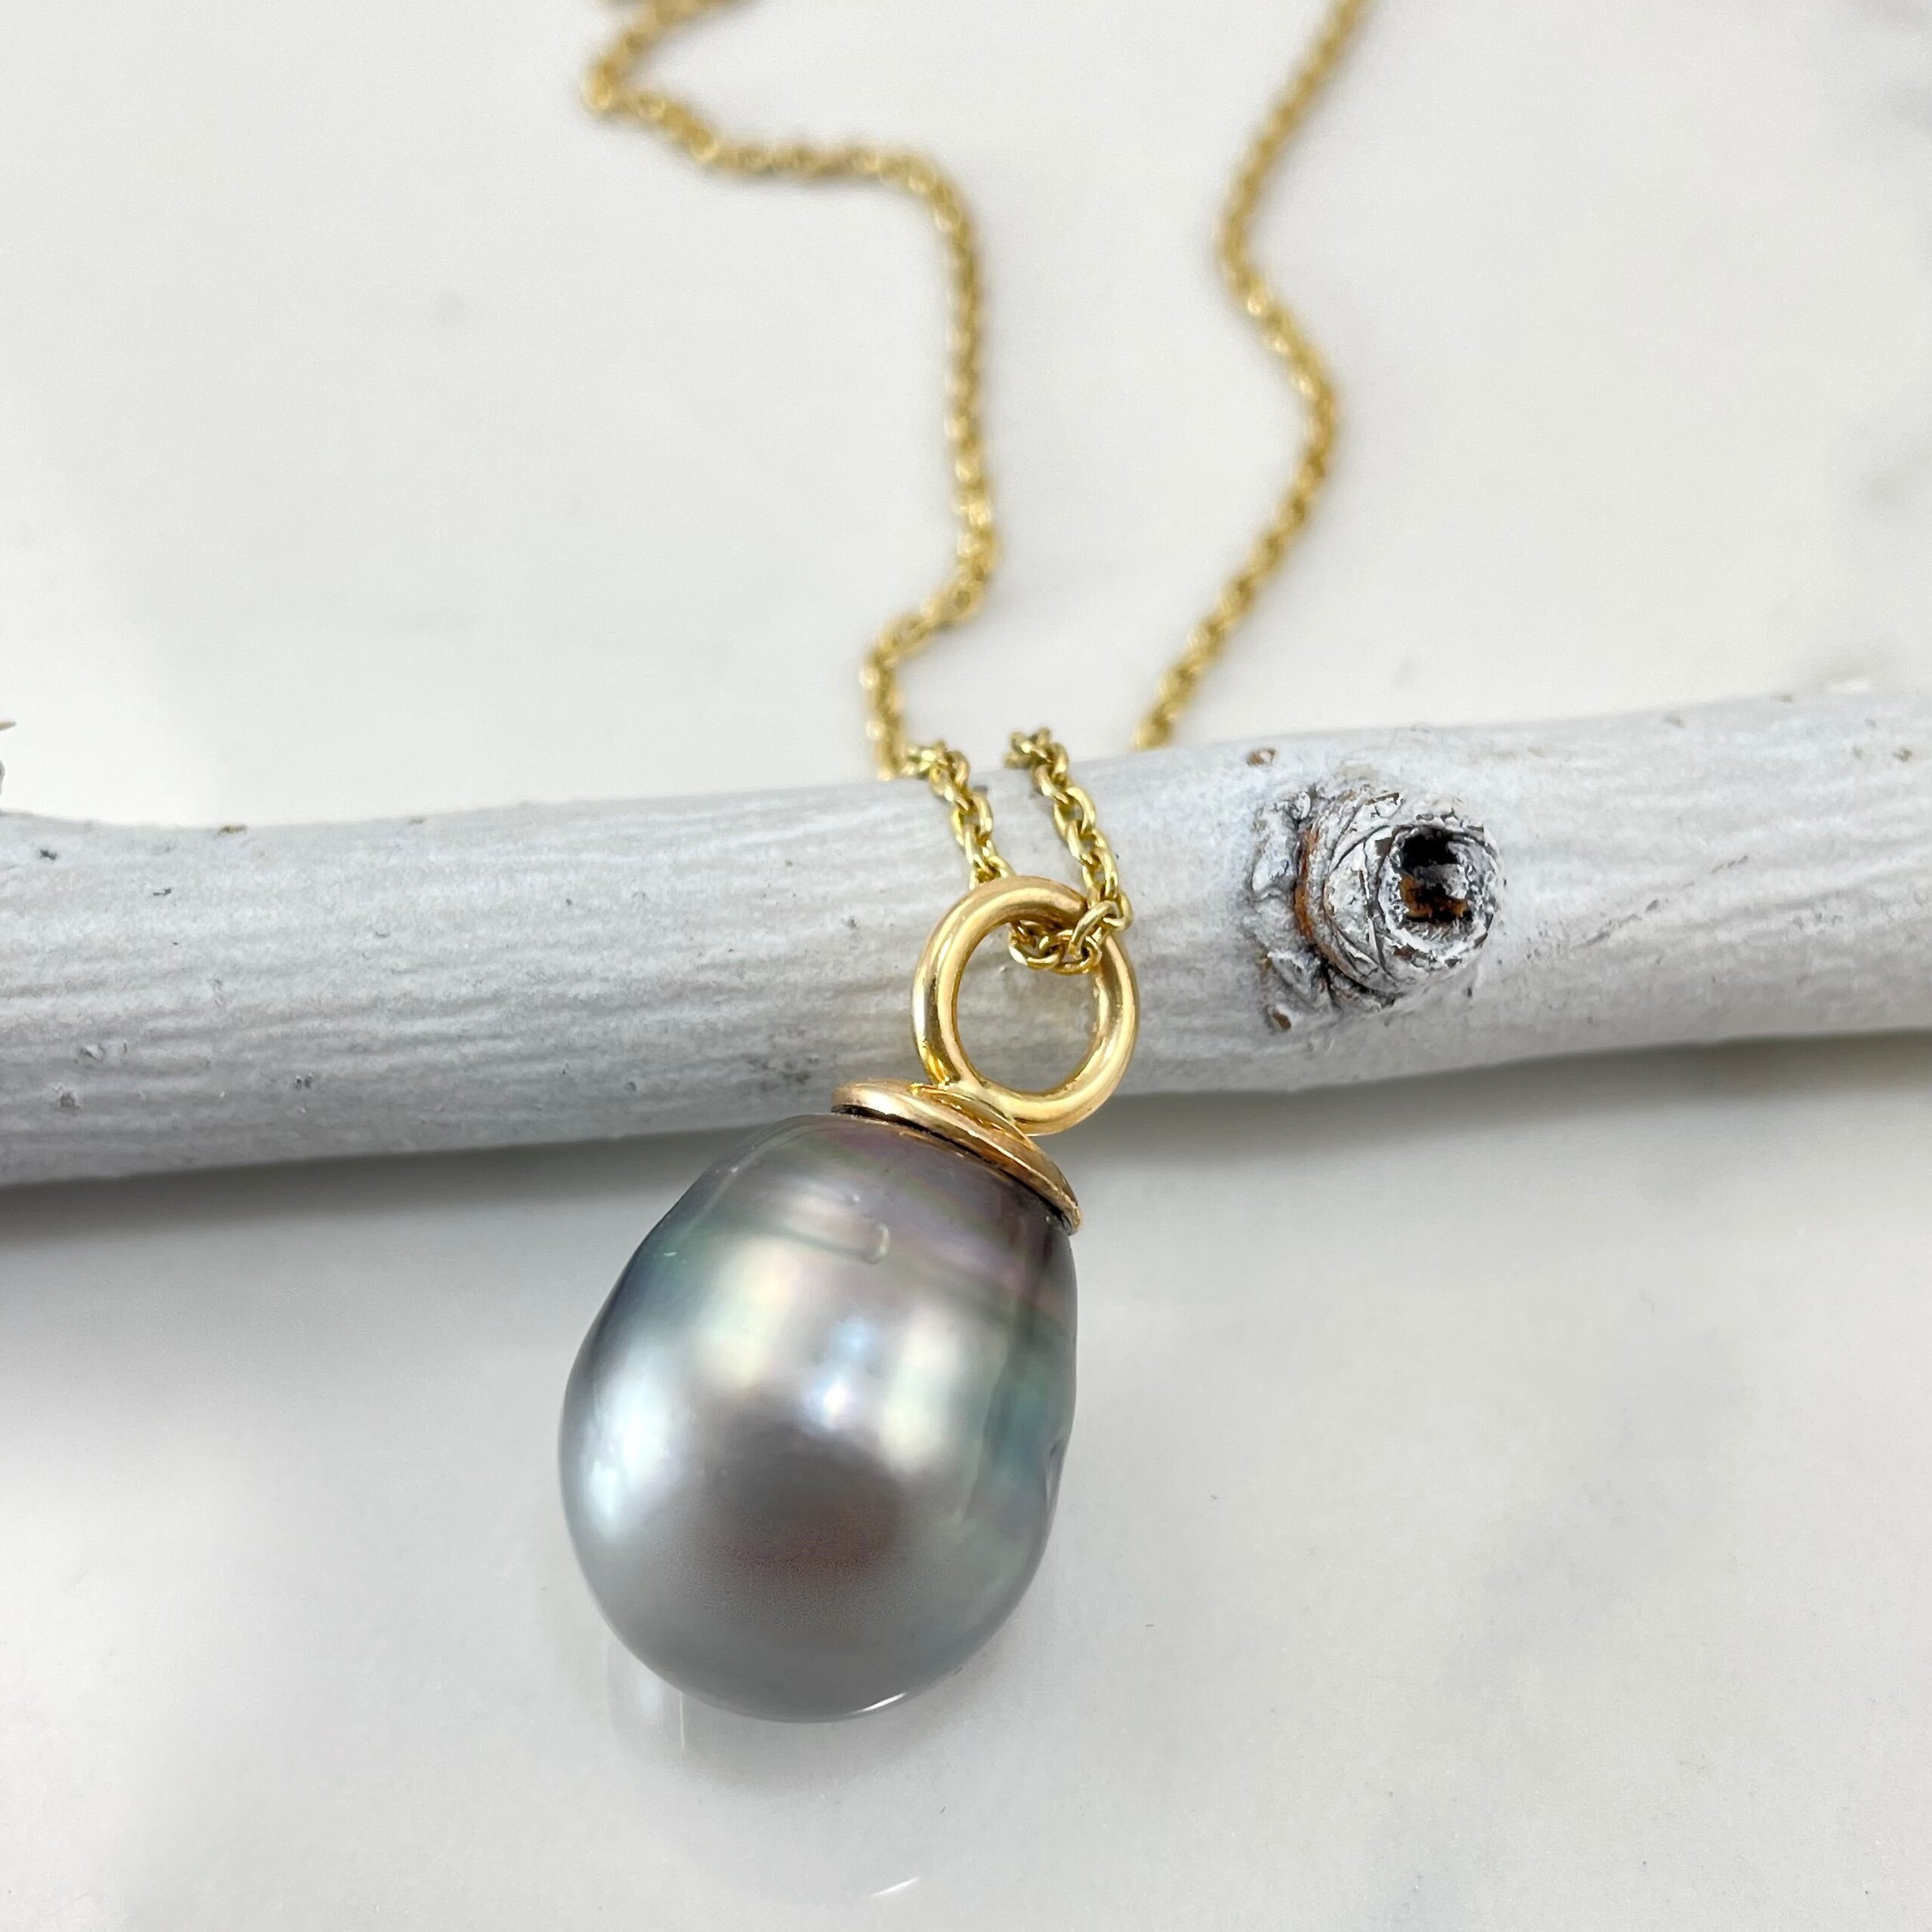 Tahitian Pearl Pendant Necklace - SOLD - Sholdt Jewelry Design